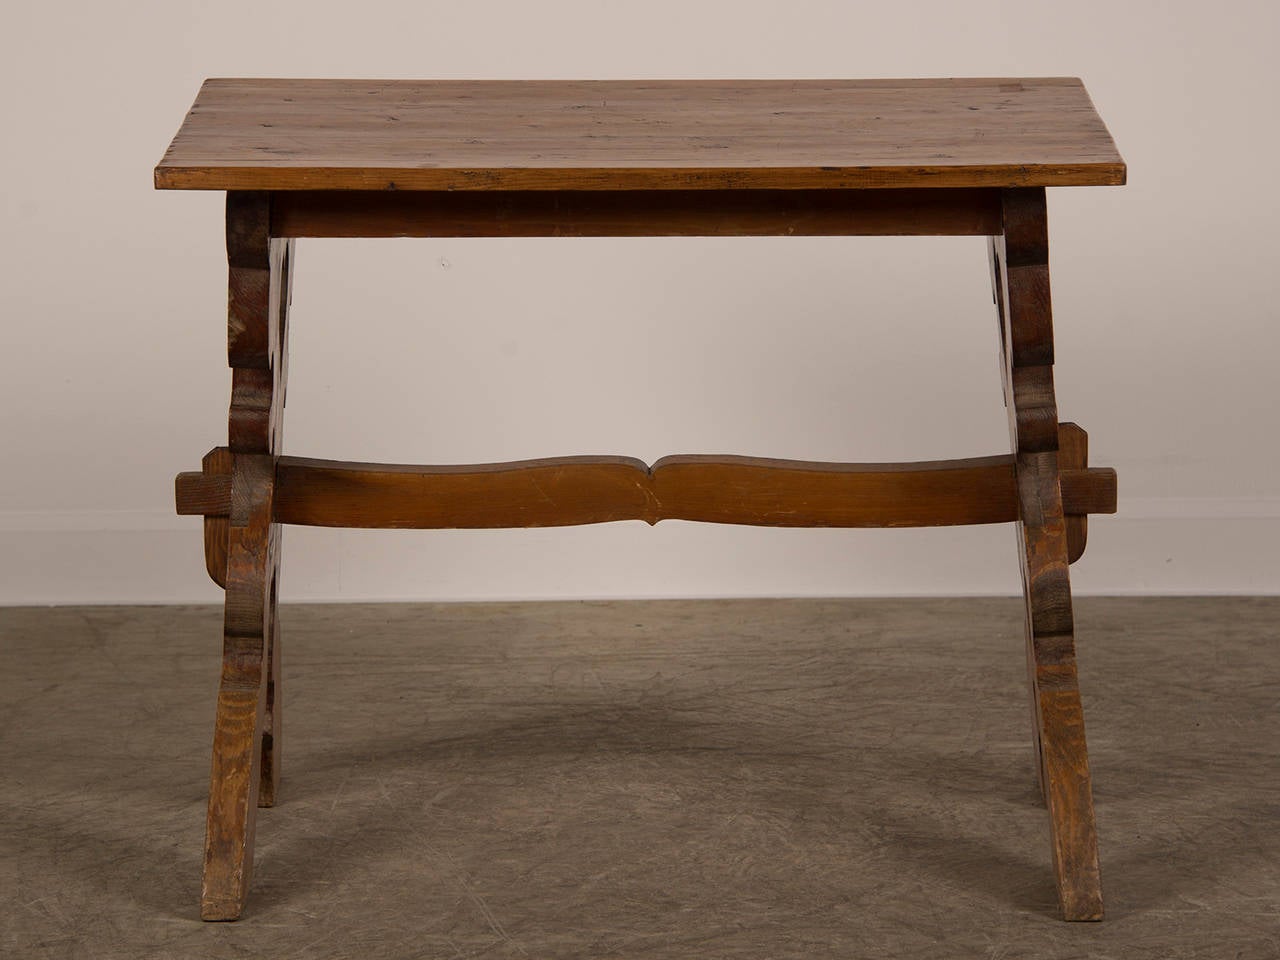 An unusual pine trestle table from Austria c. 1880 having legs in an elaborate X-form painted with a fanciful floral decoration joined by a shaped stretcher. The rectangular pine top is original. When you look closely at the base of the legs it is